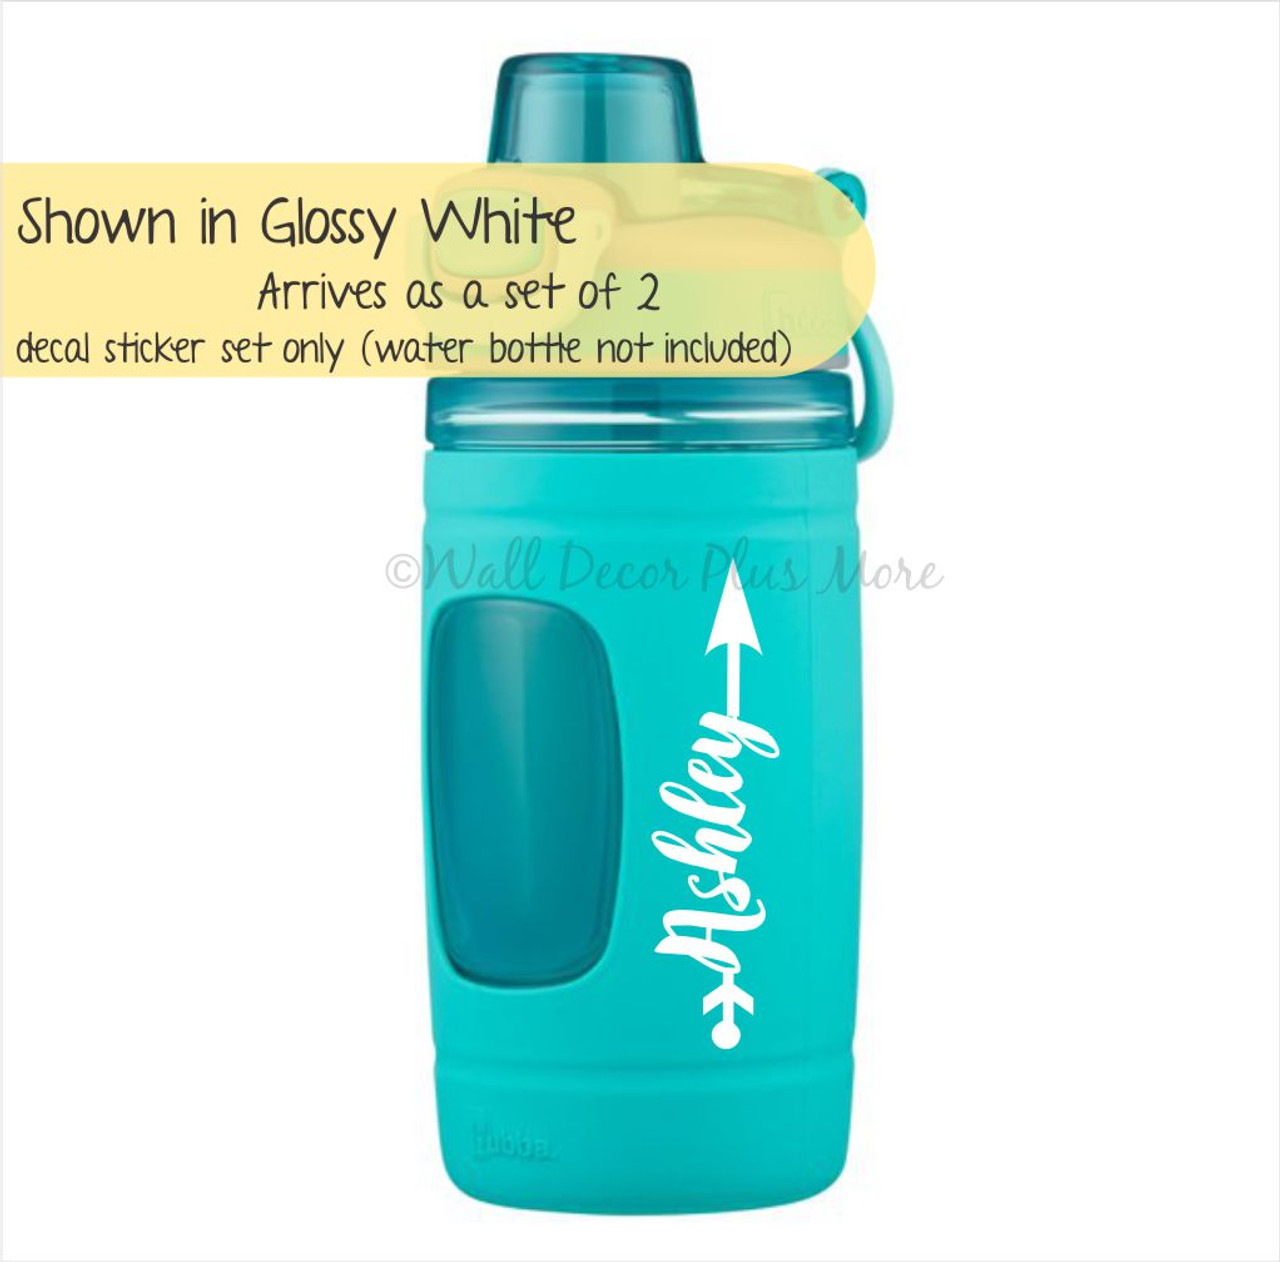 https://cdn11.bigcommerce.com/s-571px4/images/stencil/1280x1280/products/1699/17916/WD659_Monogram_Cursive_Name_with_Arrow_Decal_Stickers_for_Yeti_RTIC_Tumbler_Mugs_Kids_Waterbottle_School_Label_Set_of_2_Custom_Name_Letters_Glossy_white__21680.1626899813.jpg?c=2